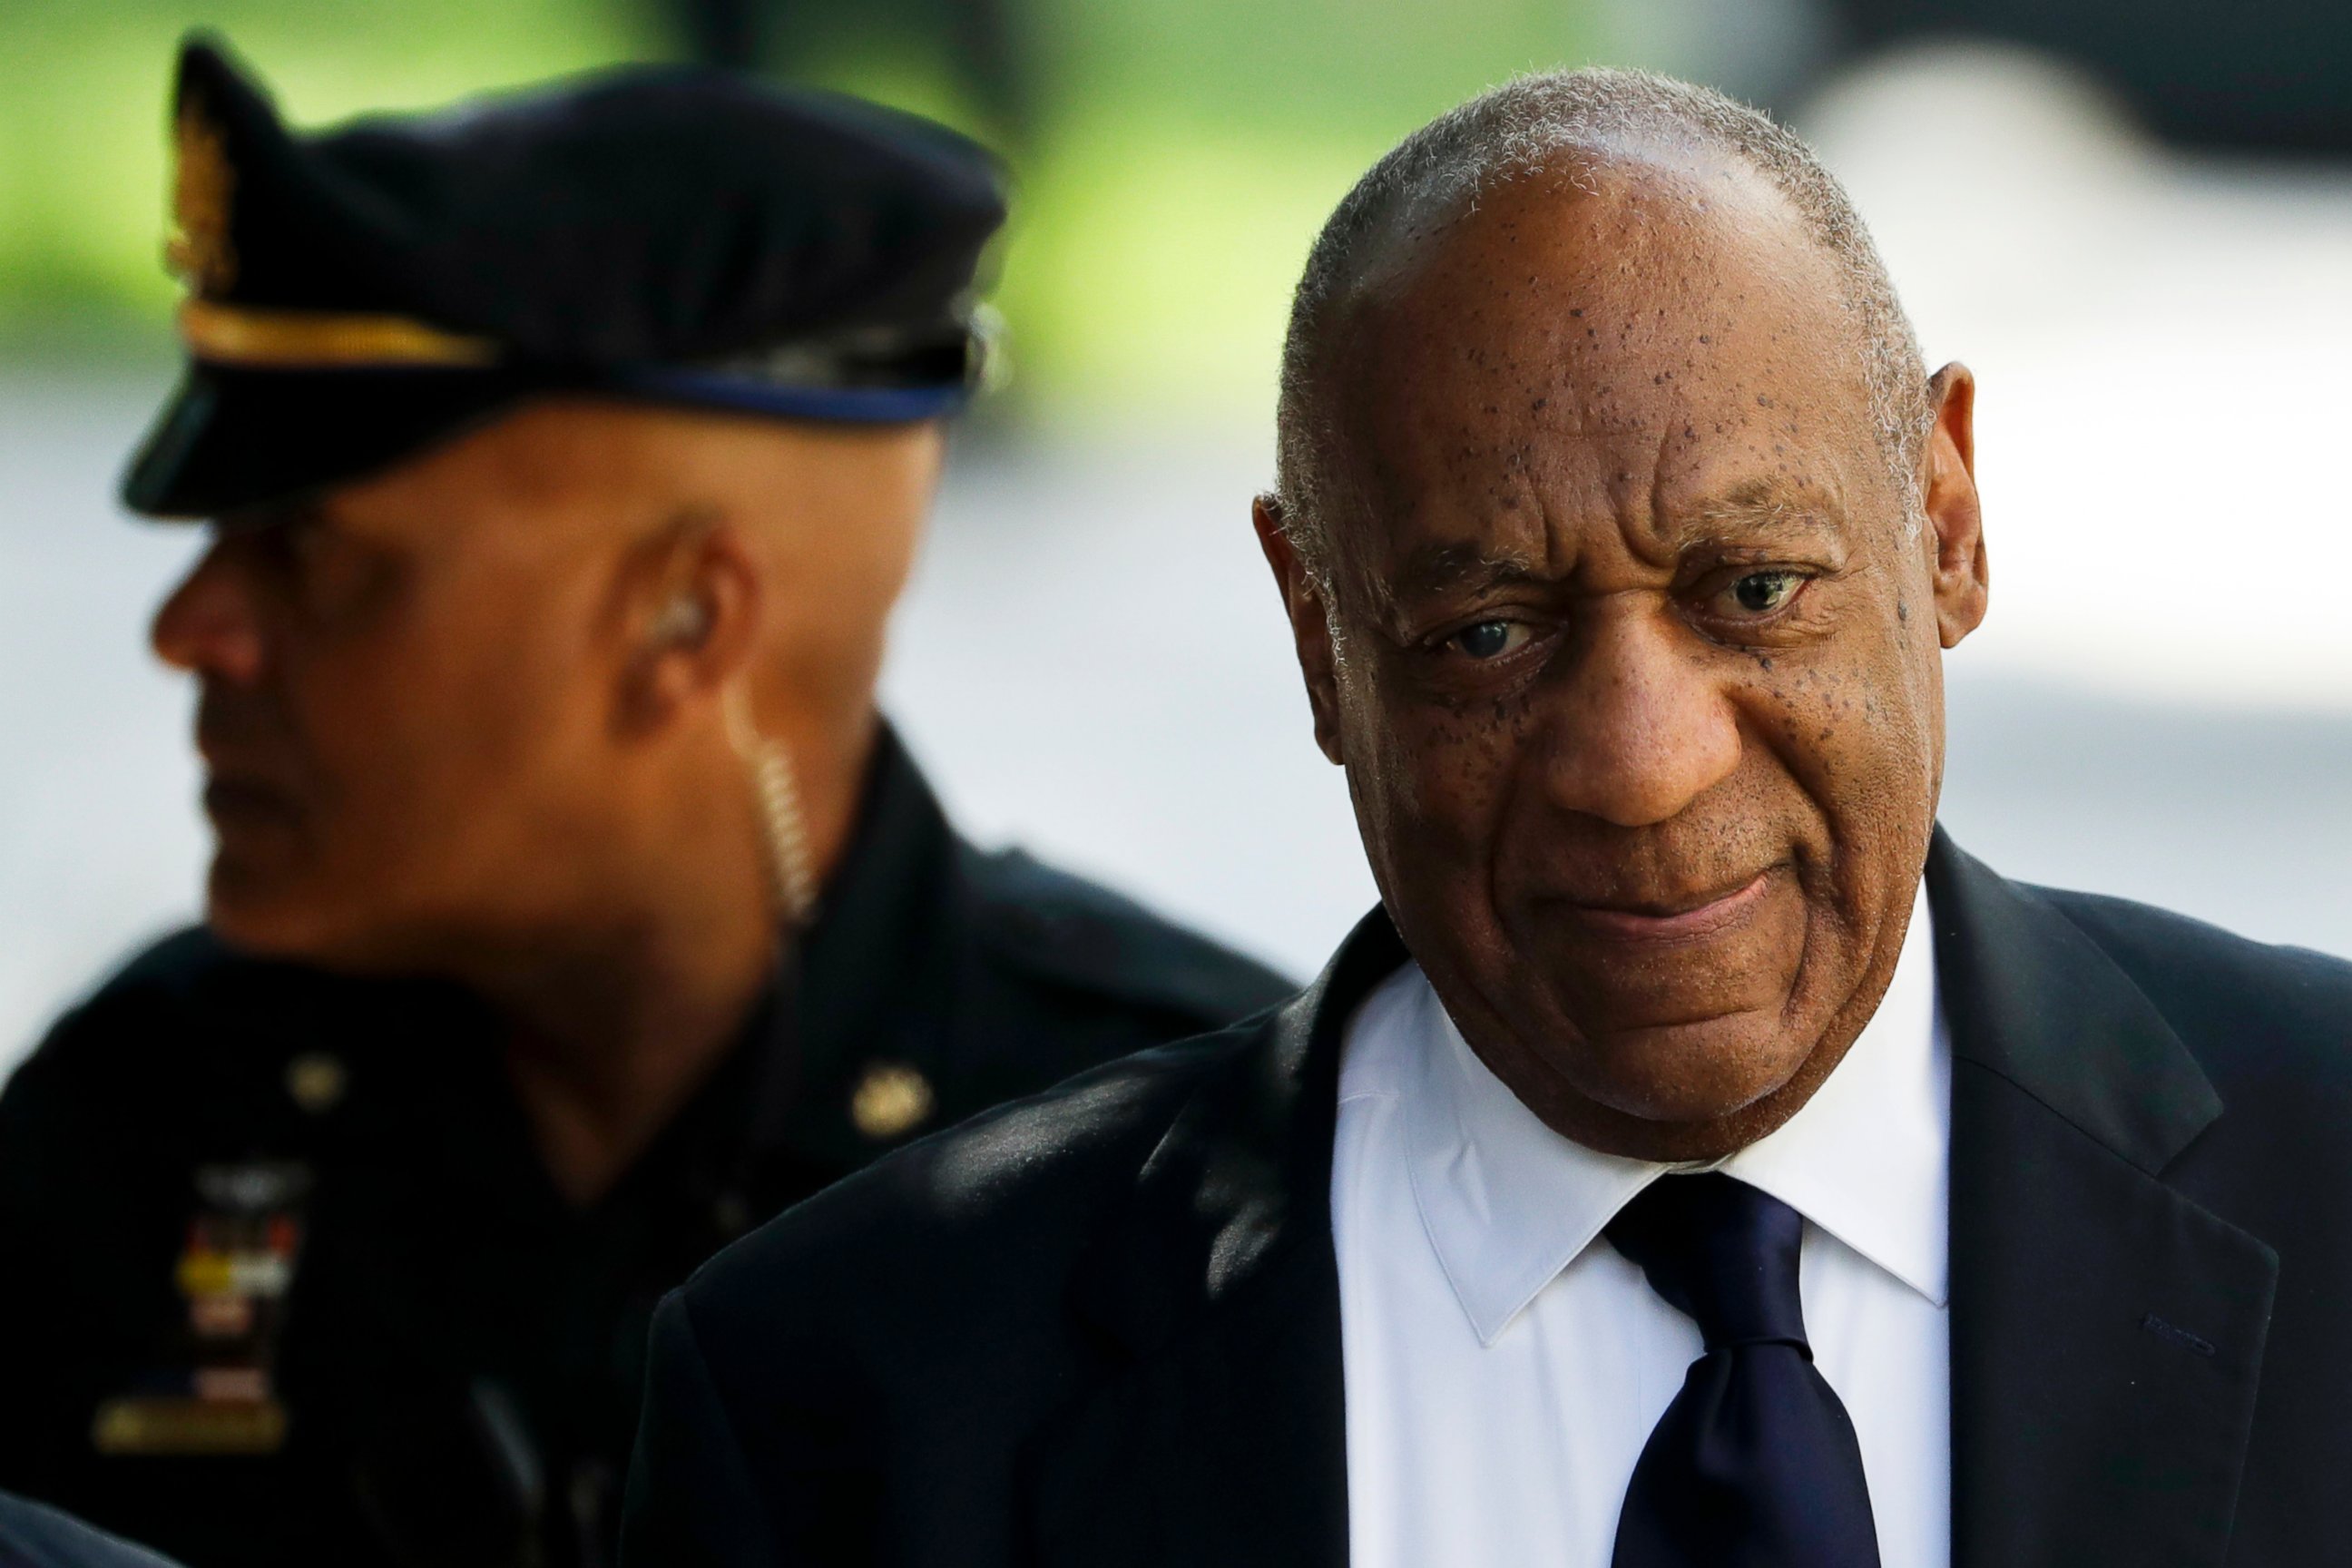 PHOTO: Bill Cosby arrives for his sexual assault trial at the Montgomery County Courthouse, June 13, 2017, in Norristown, Pa.